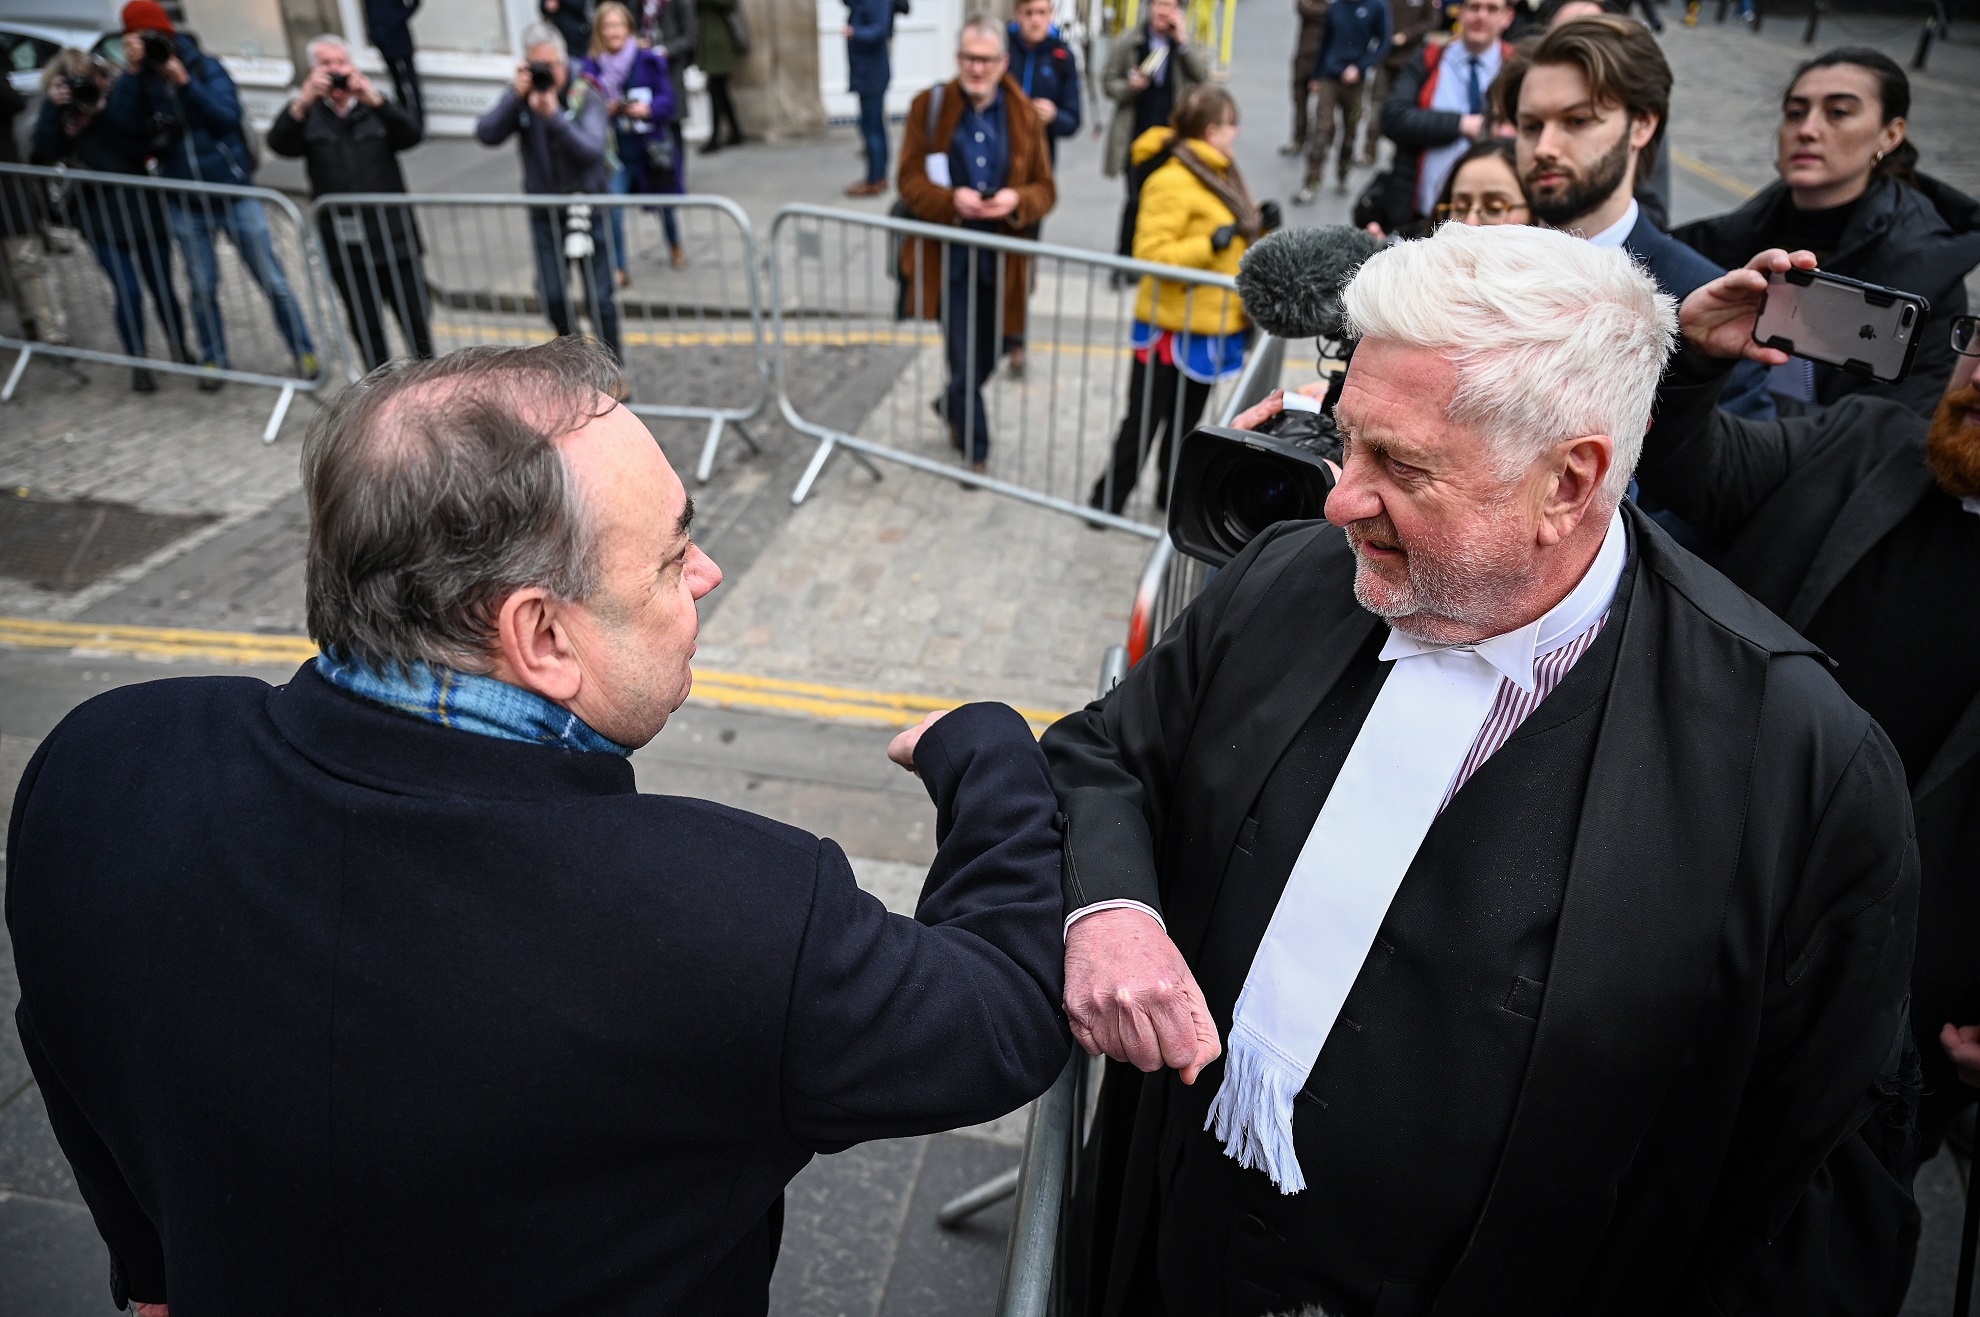 Salmond celebrates winning his criminal trial in March (Photo by Jeff J Mitchell/Getty Images)